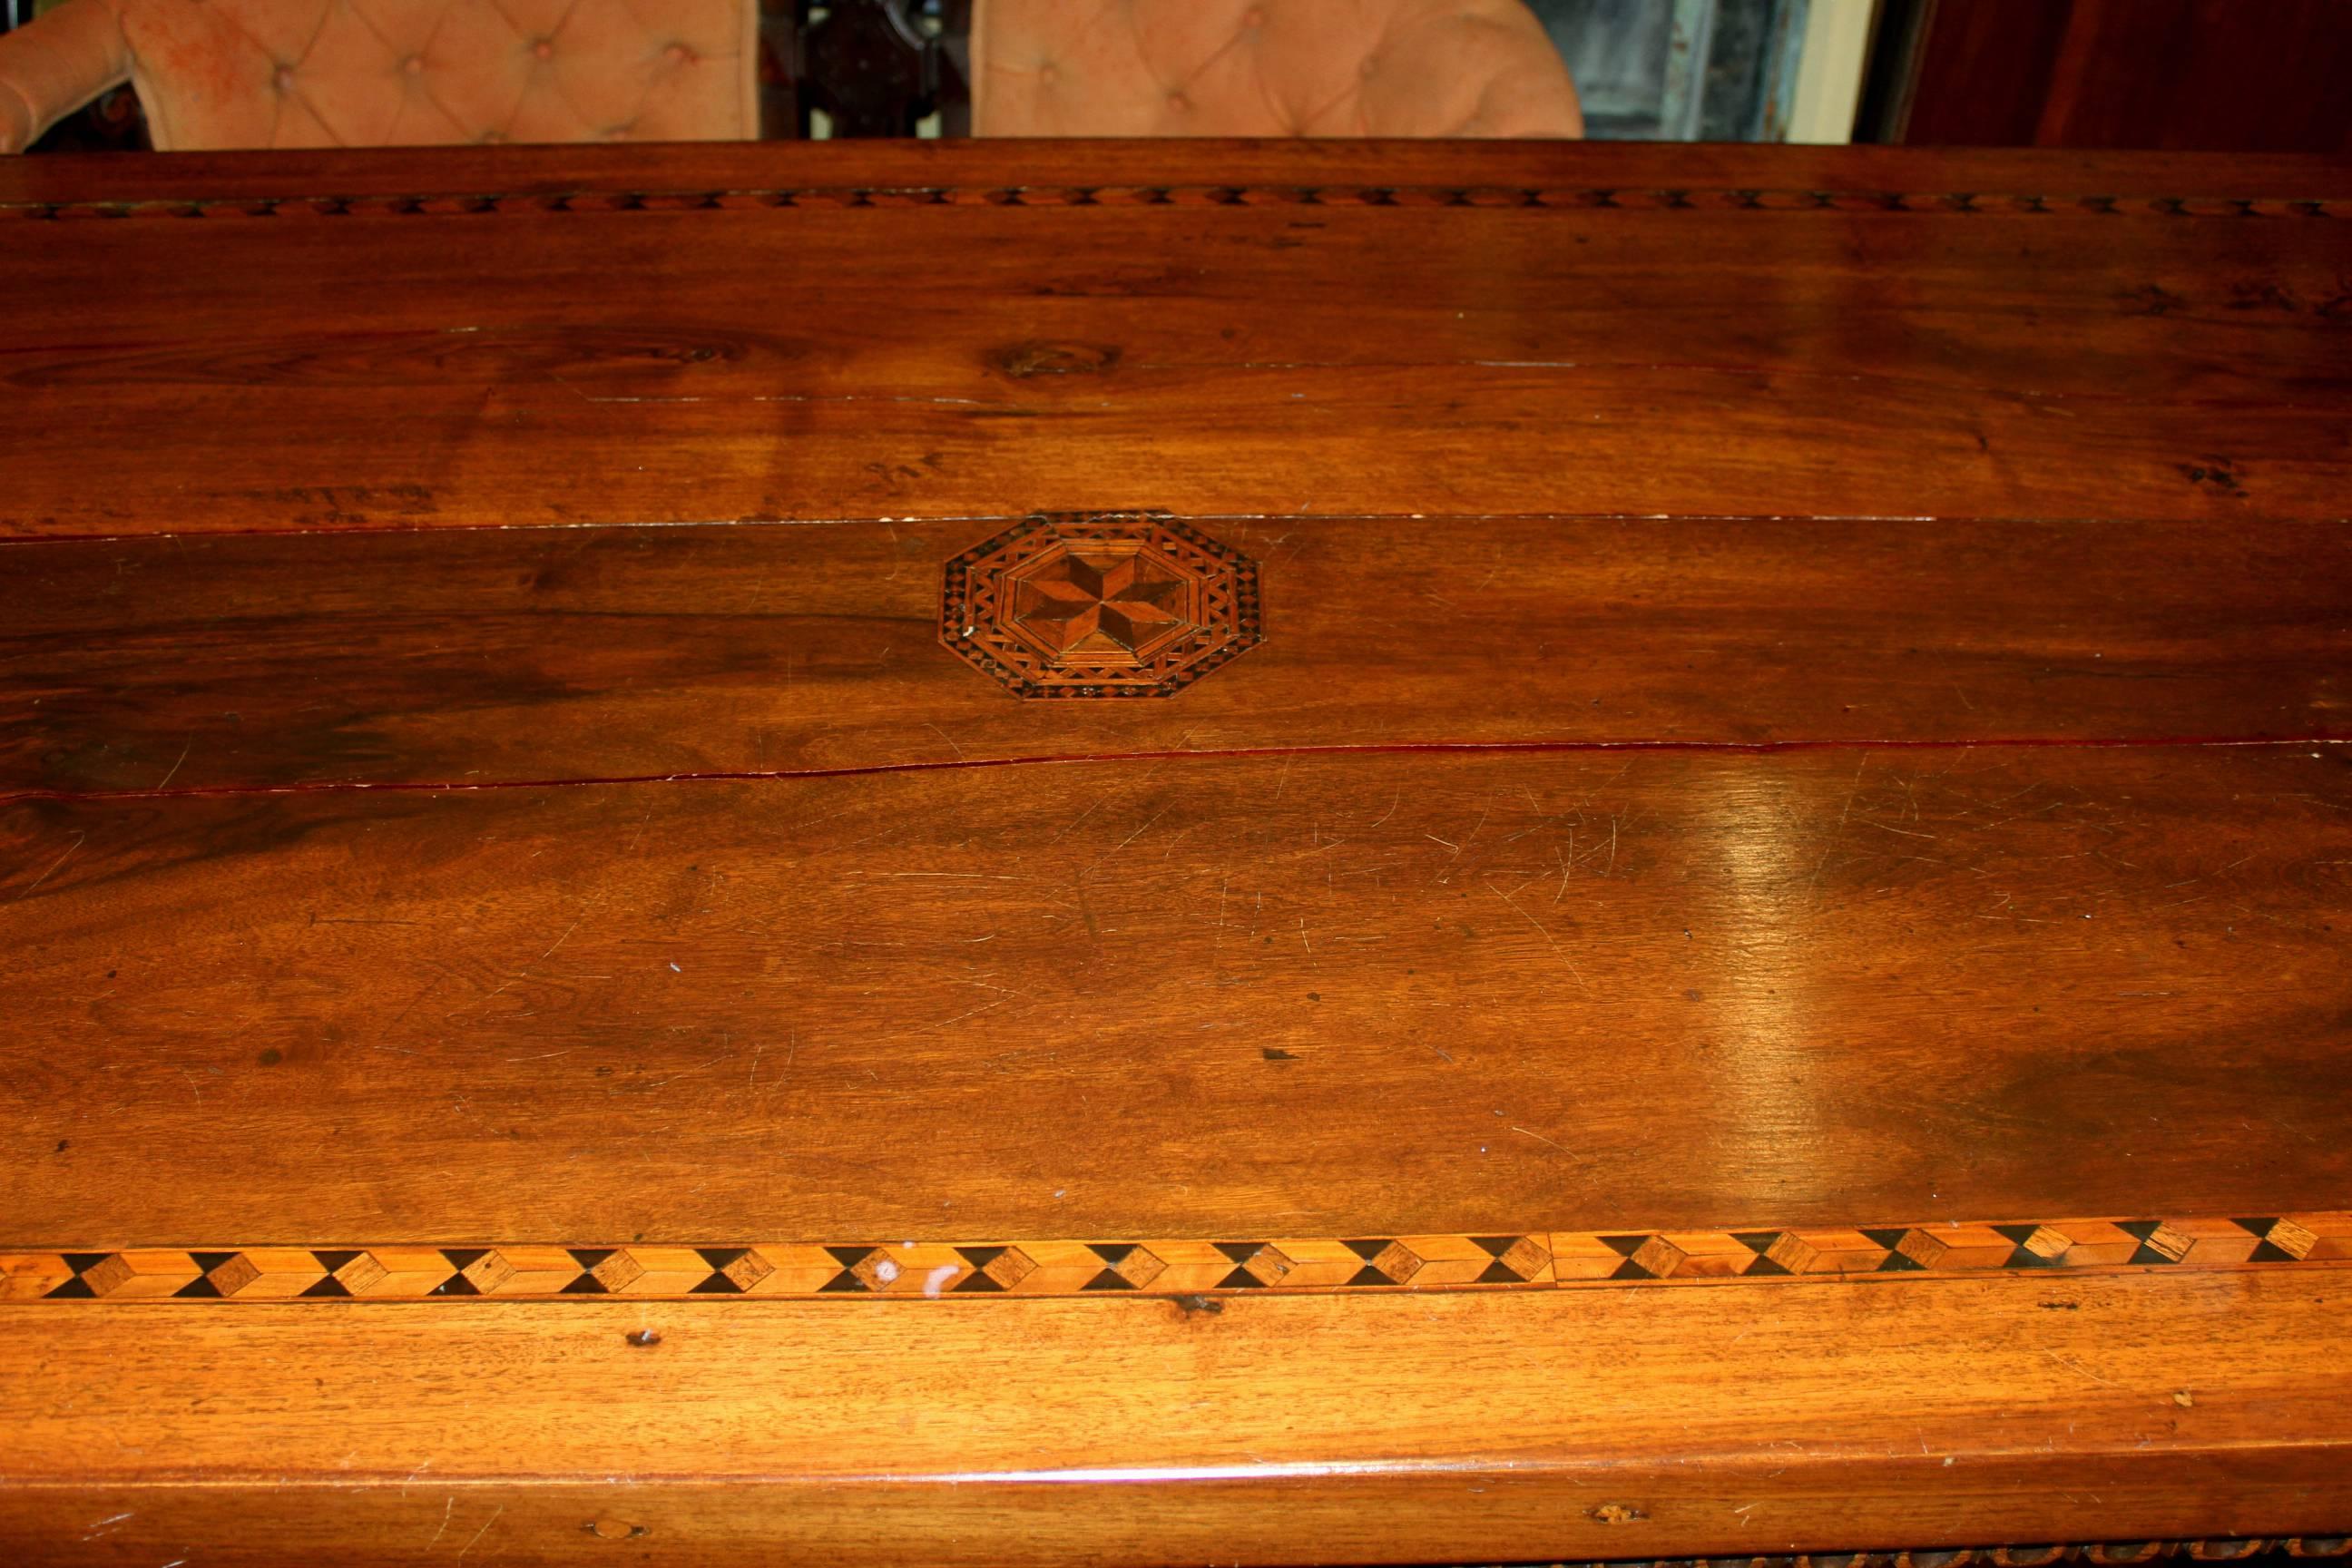 Italian 19th Century Continental Walnut Refectory or Trestle Table with Geometric Inlay